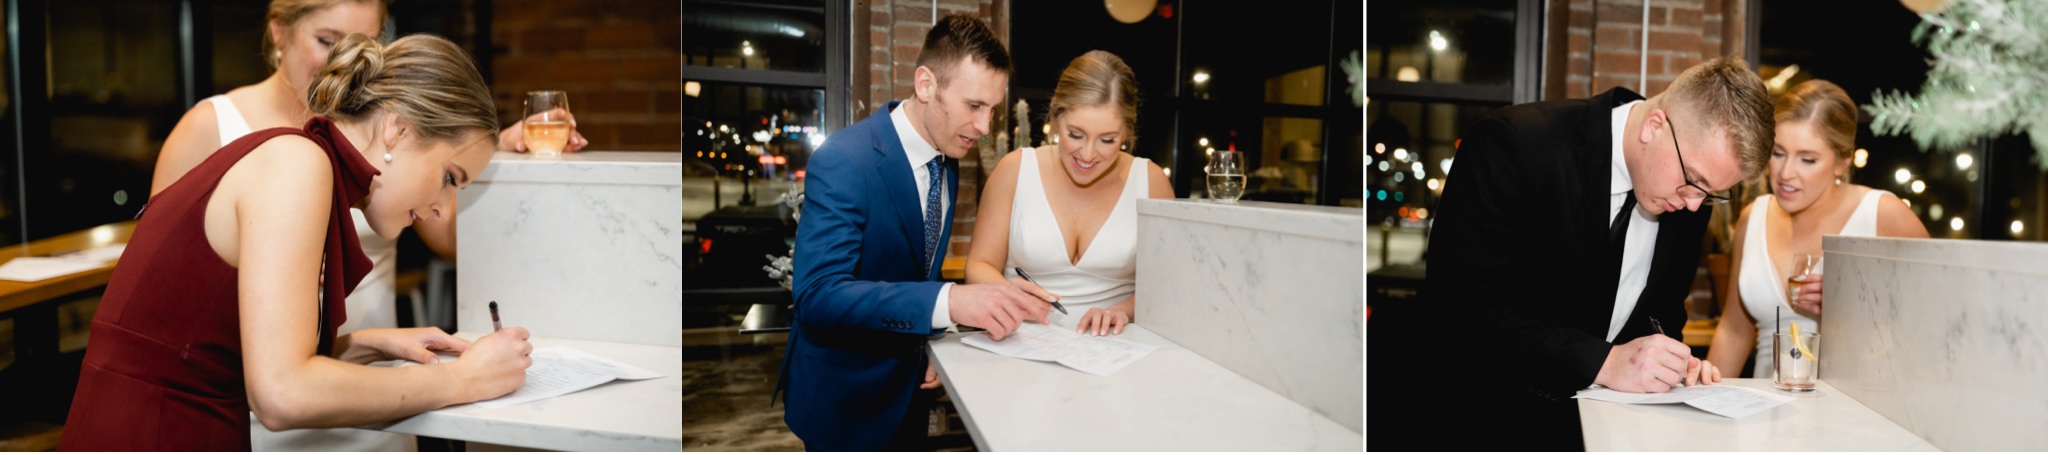 signing of the marriage license